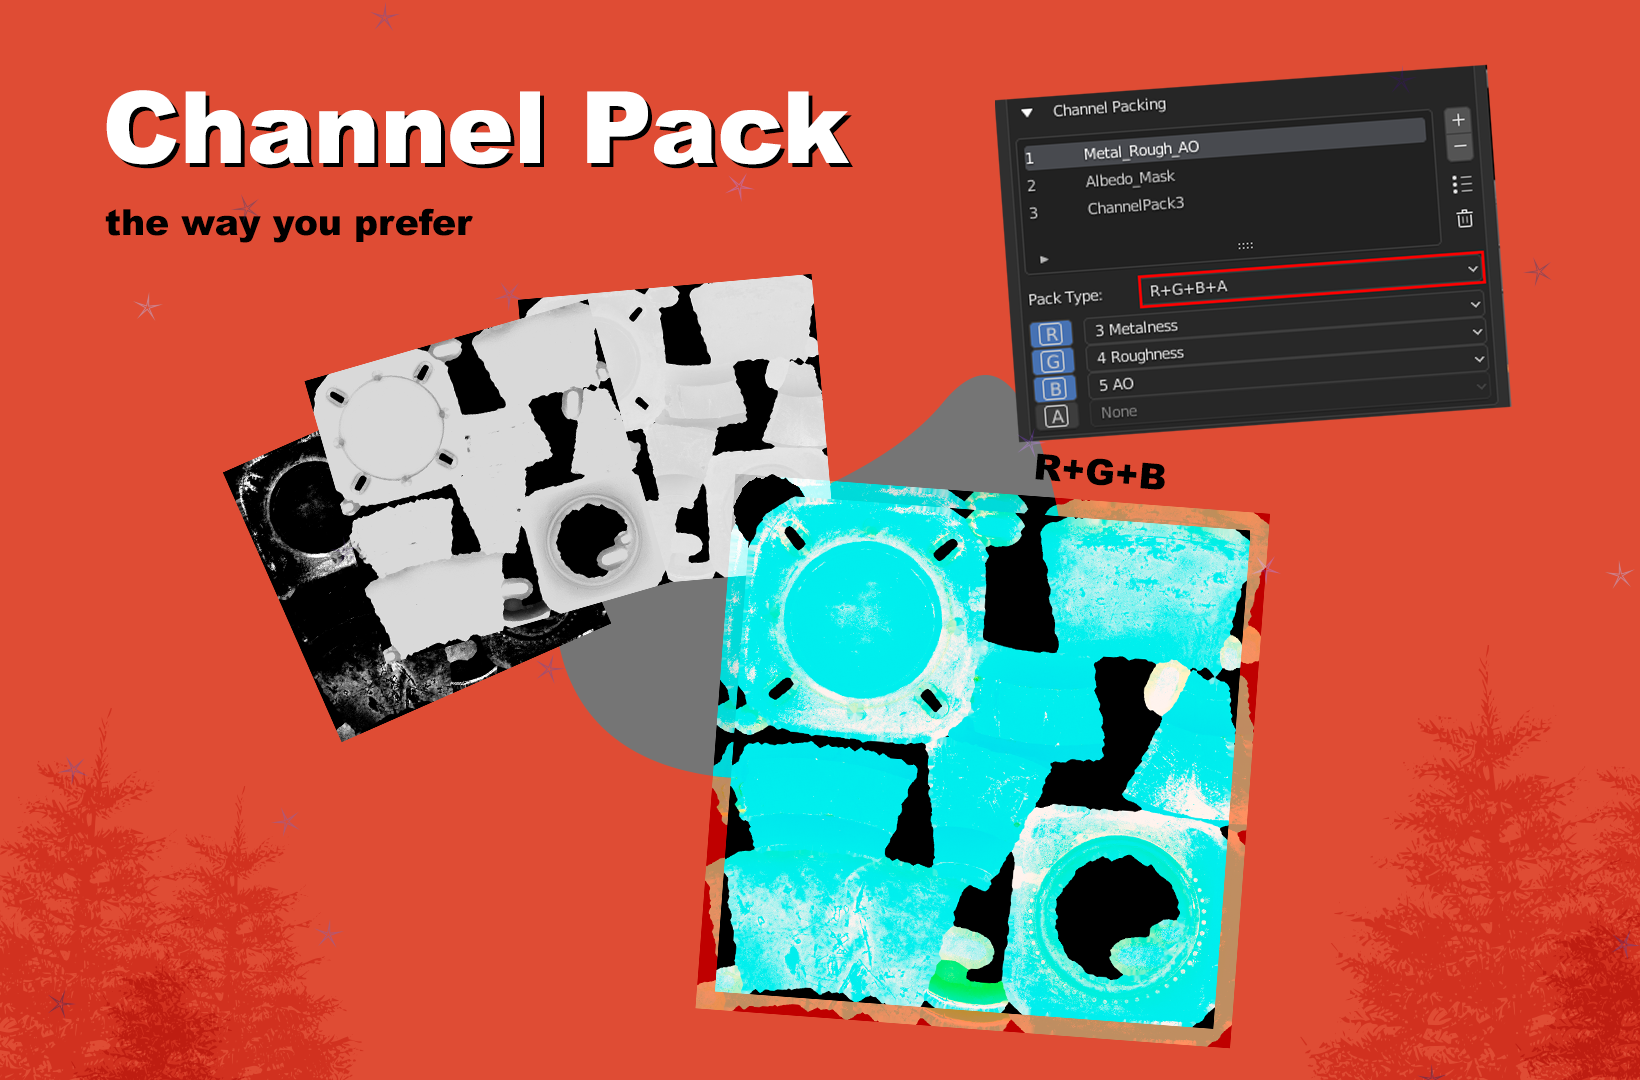 Channel Pack maps the way you prefer